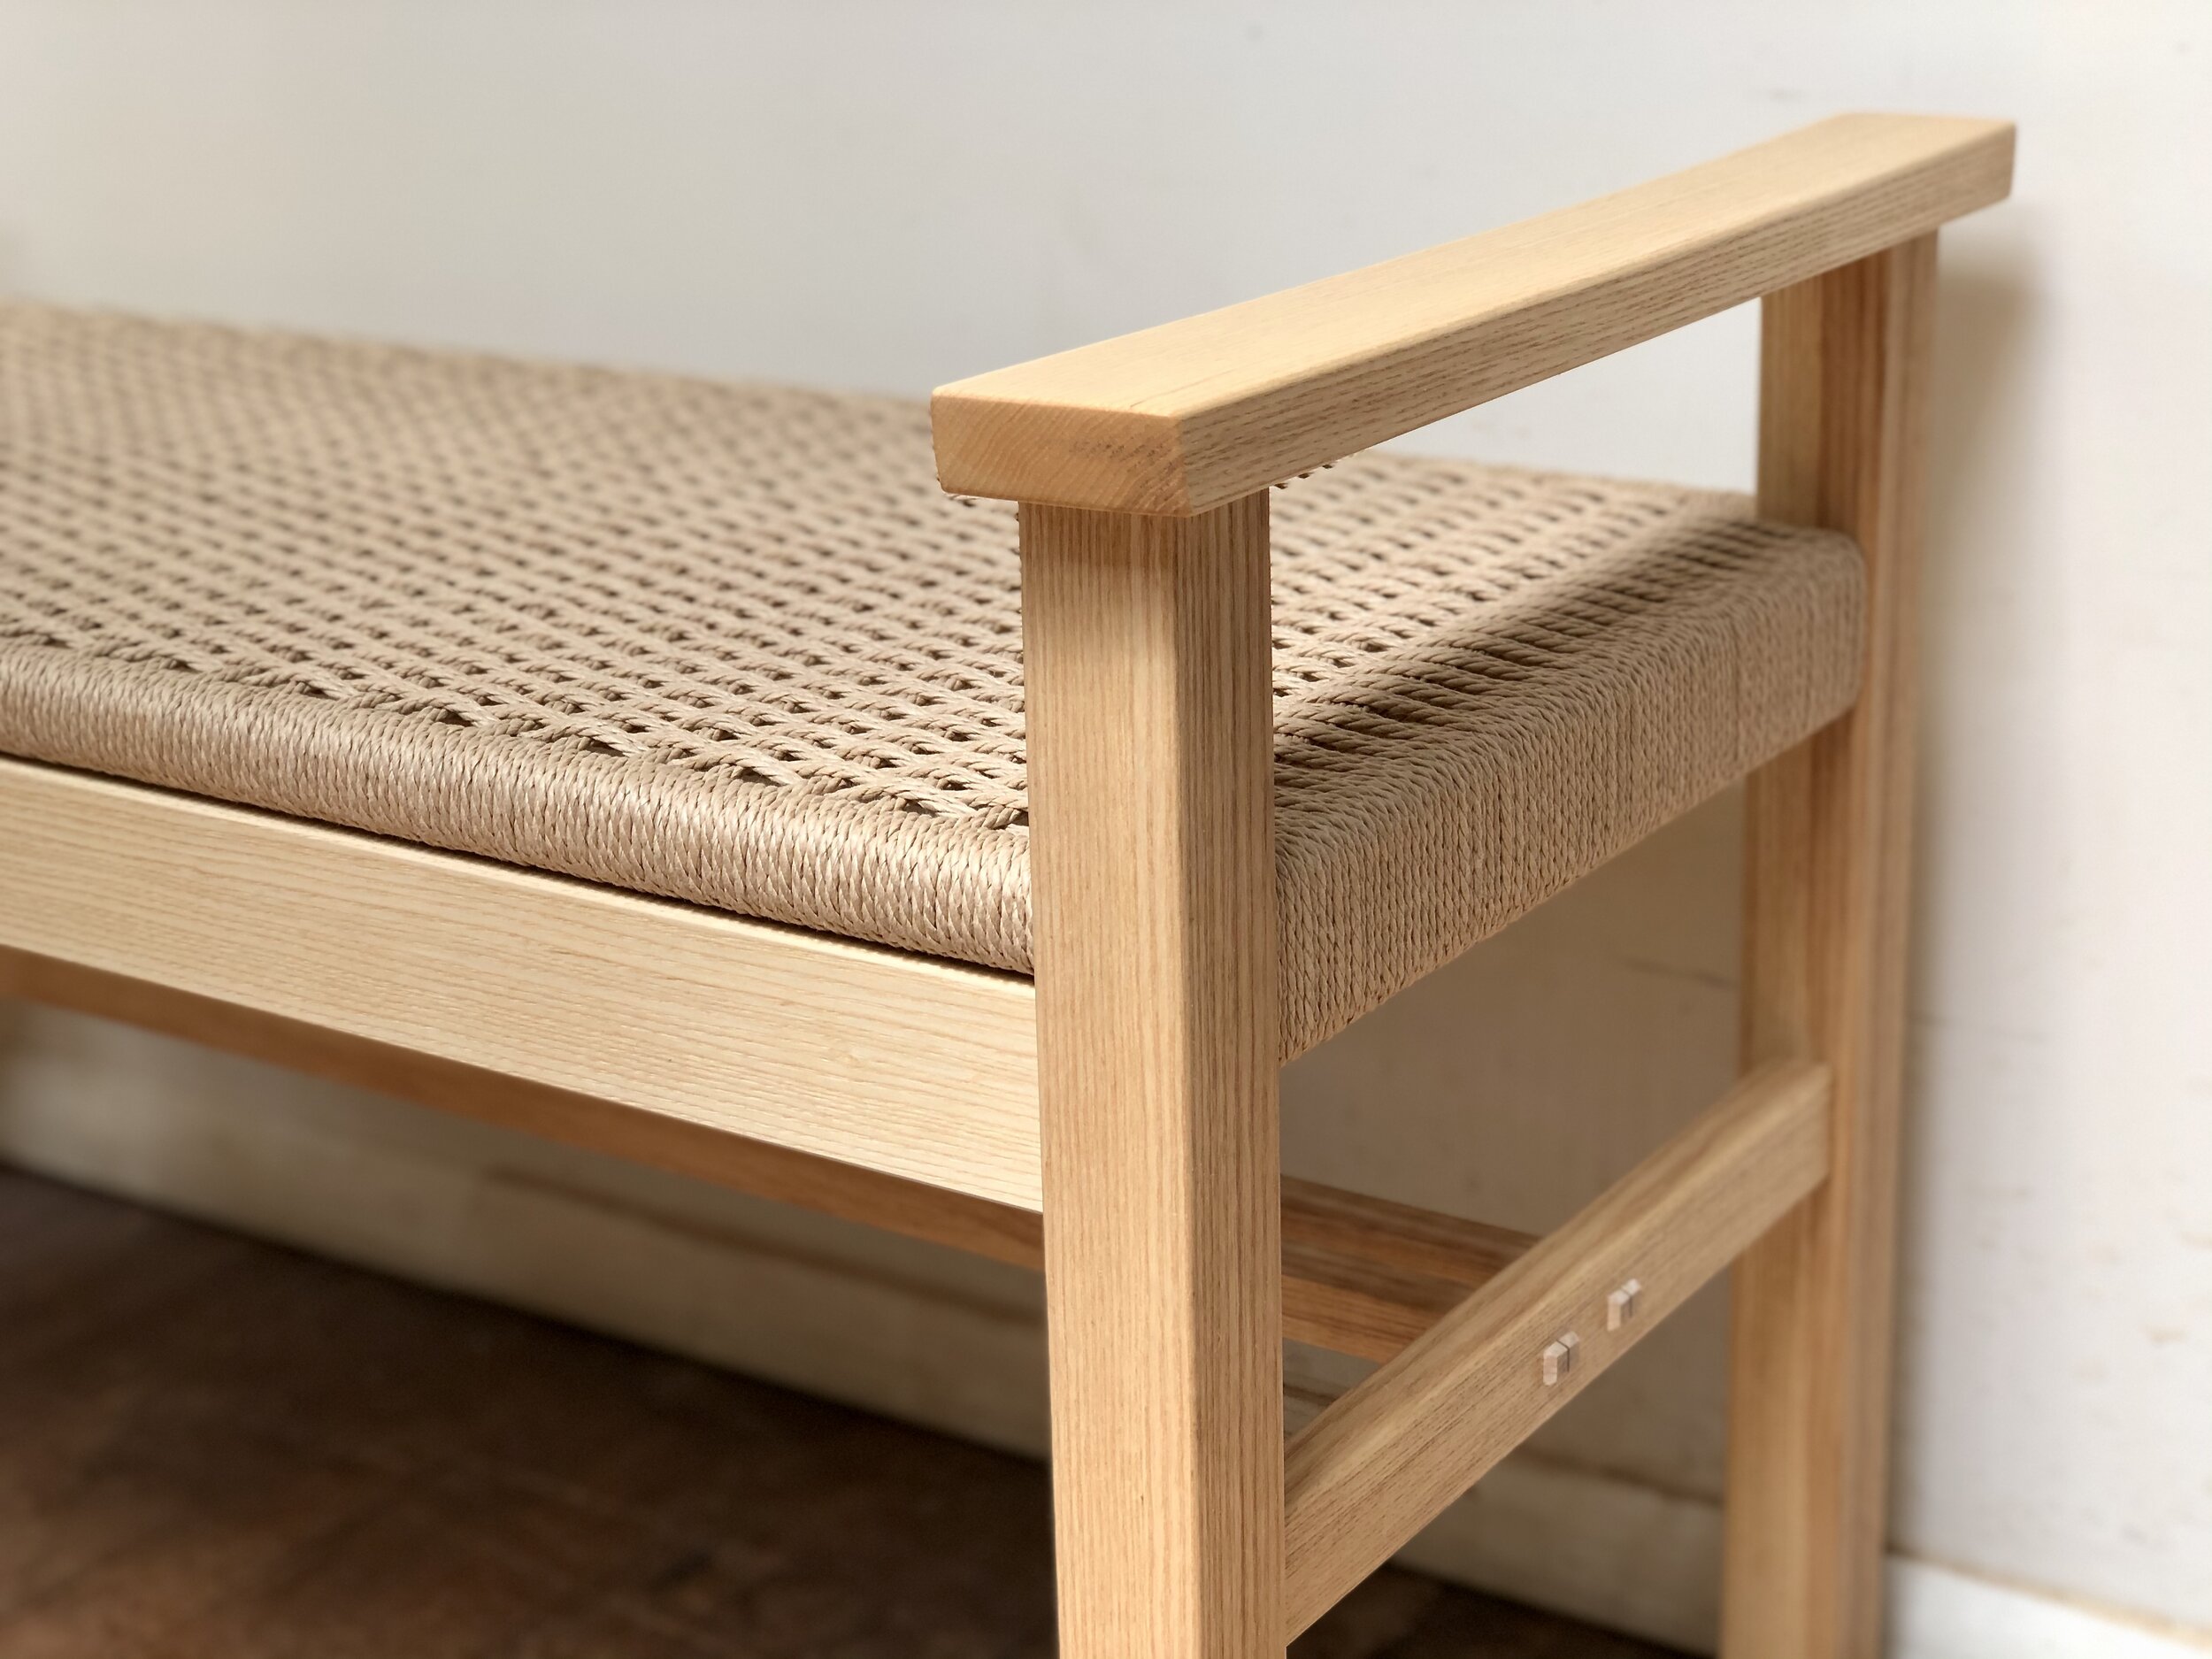 Contemporary stool with a woven Danish cord seat - FineWoodworking